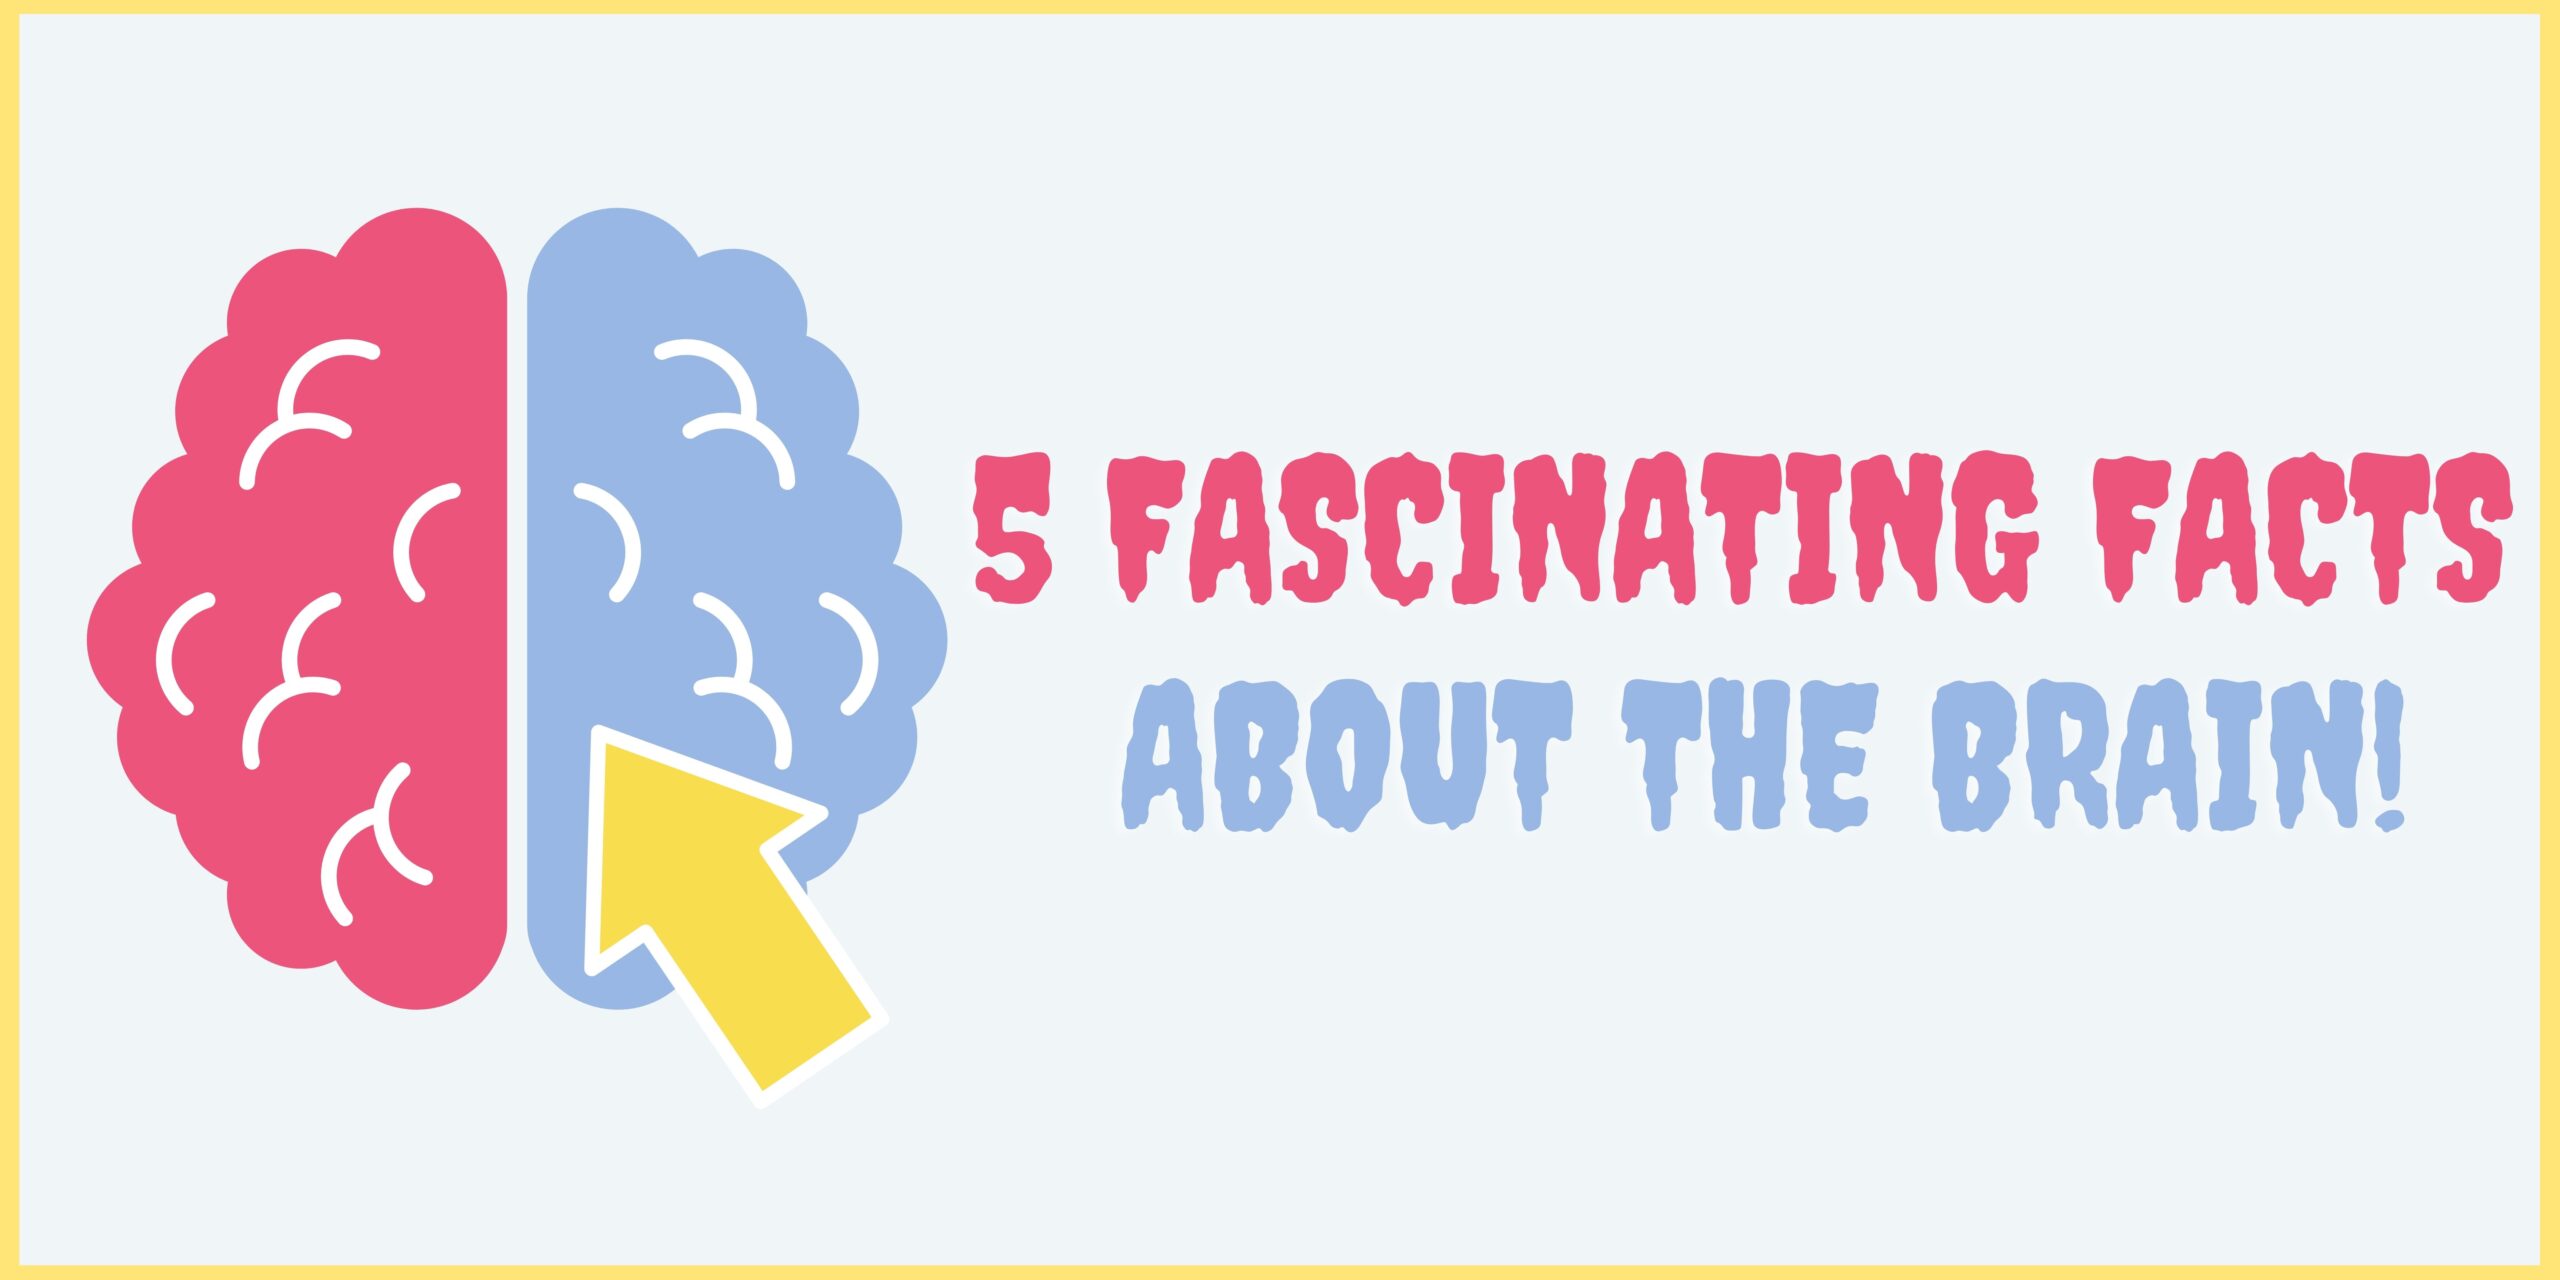 What are the 5 fascinating facts you should know about the brain?